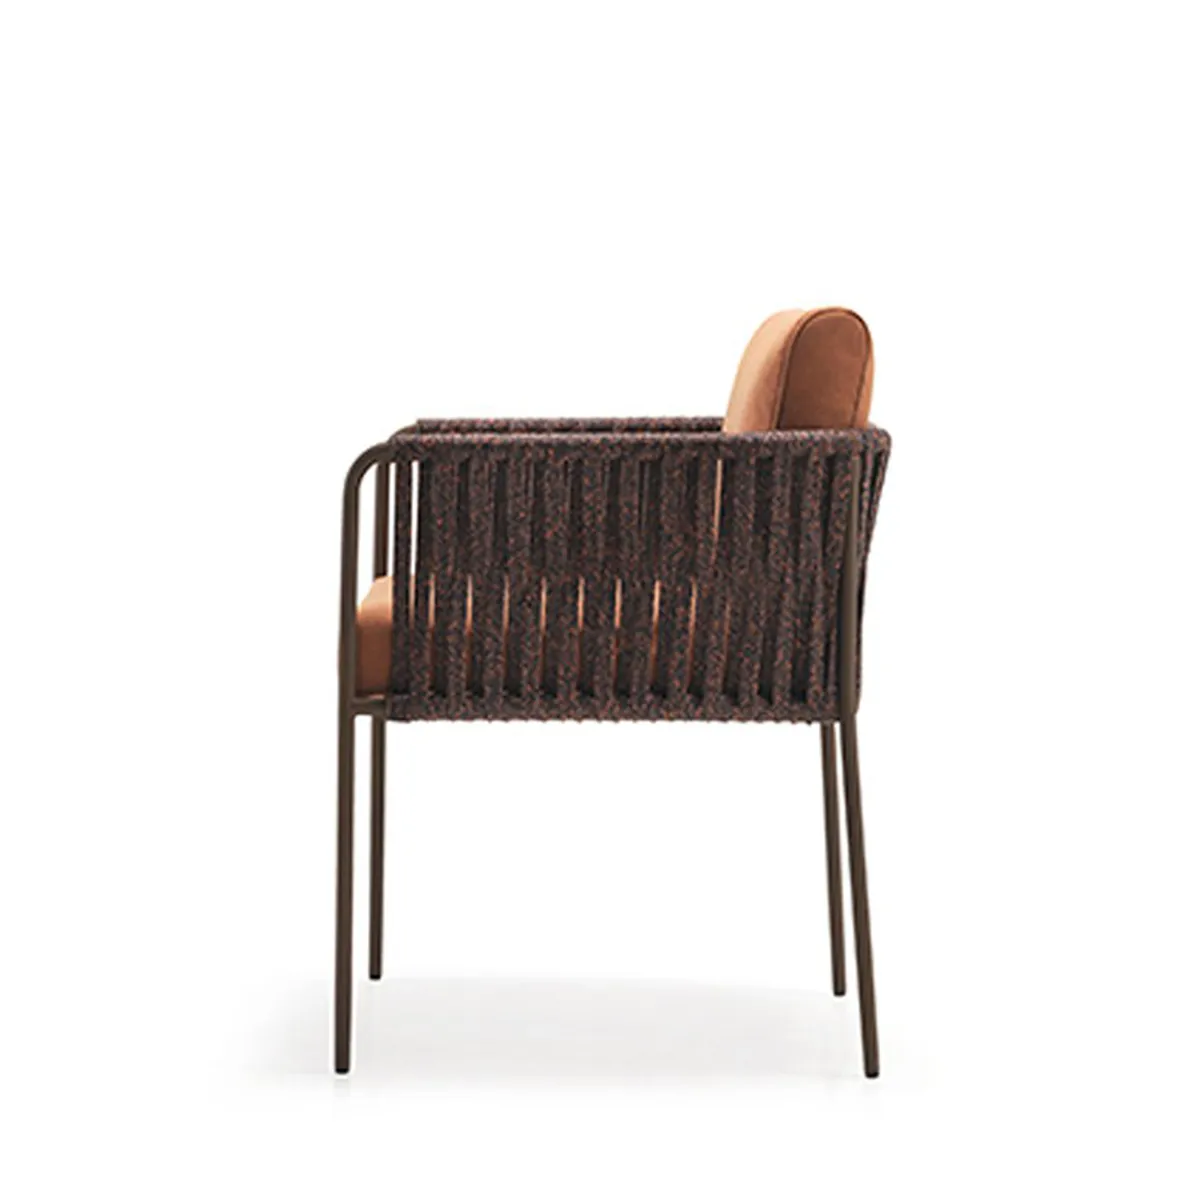 Hitch Armchair Exterior Woven Resturant Furniture Inside Out Contracts 1